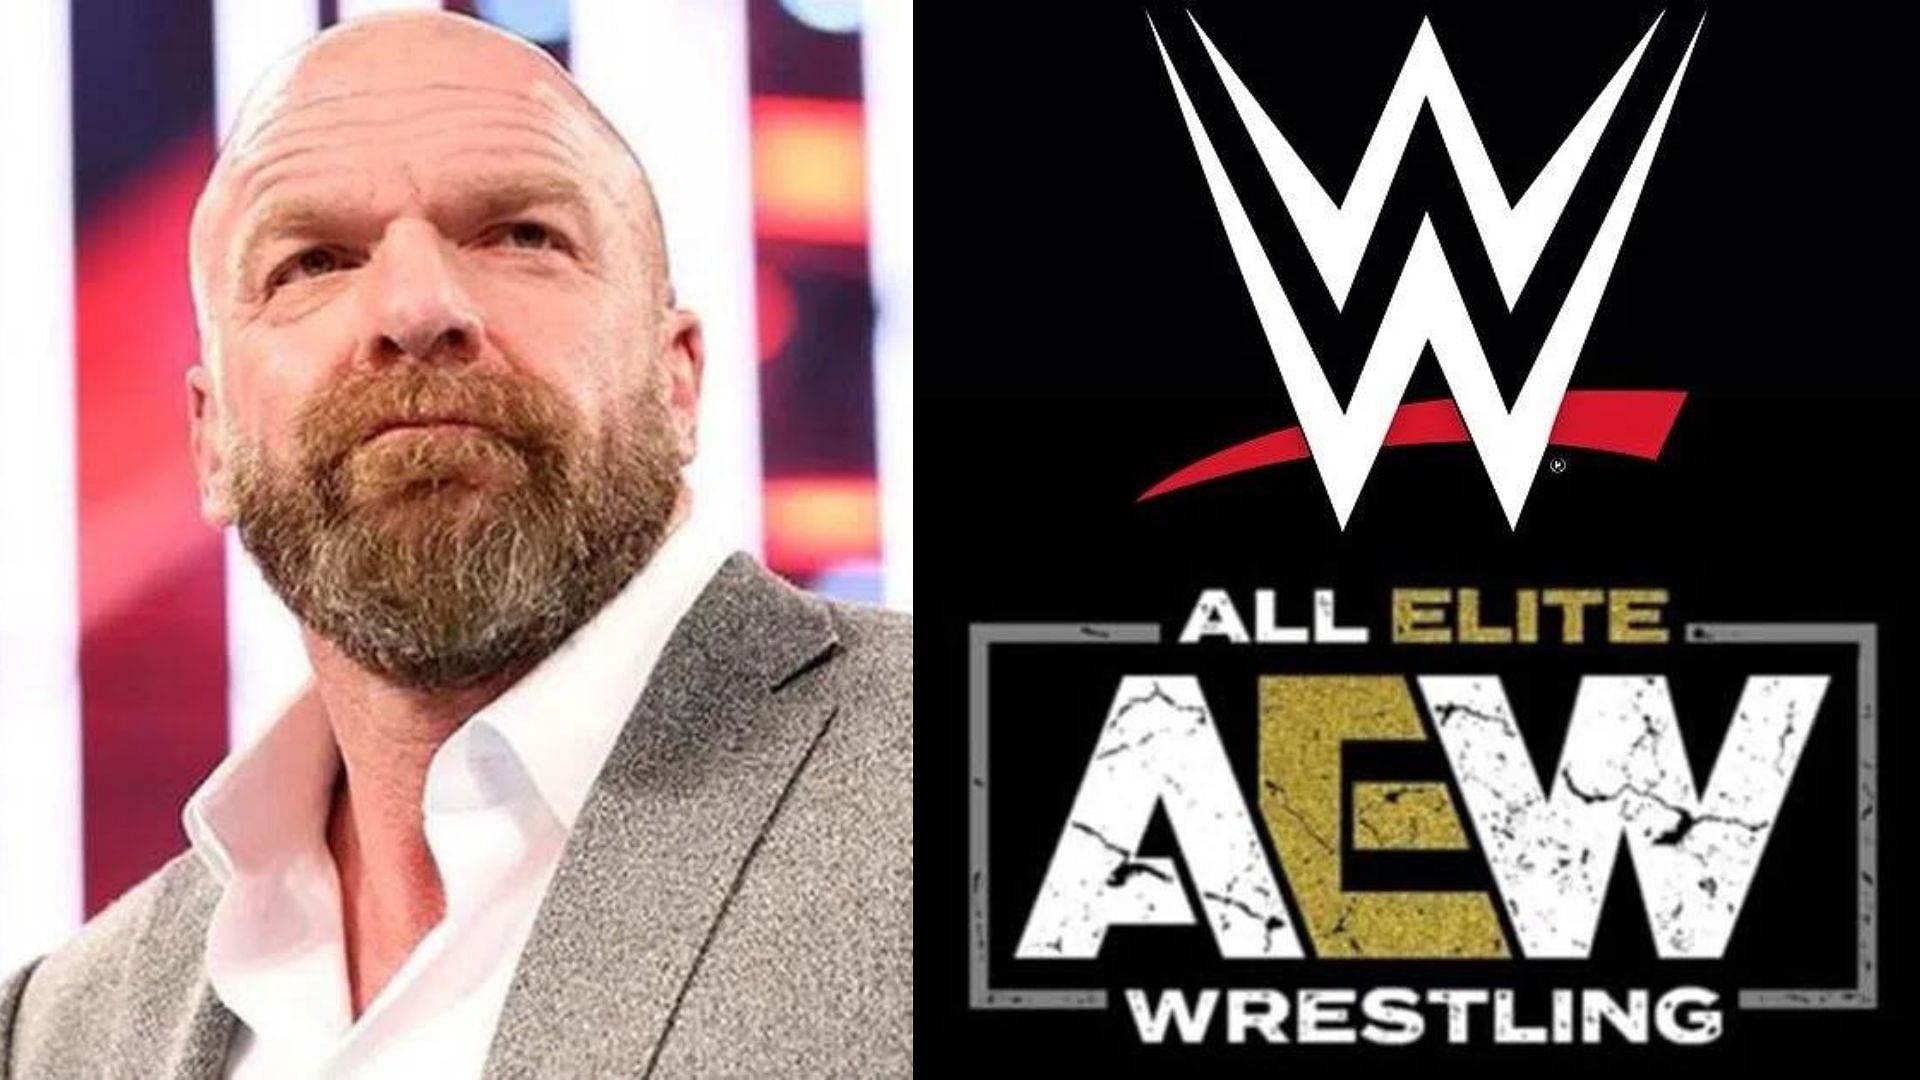 Could these two AEW stars jump ship to WWE?